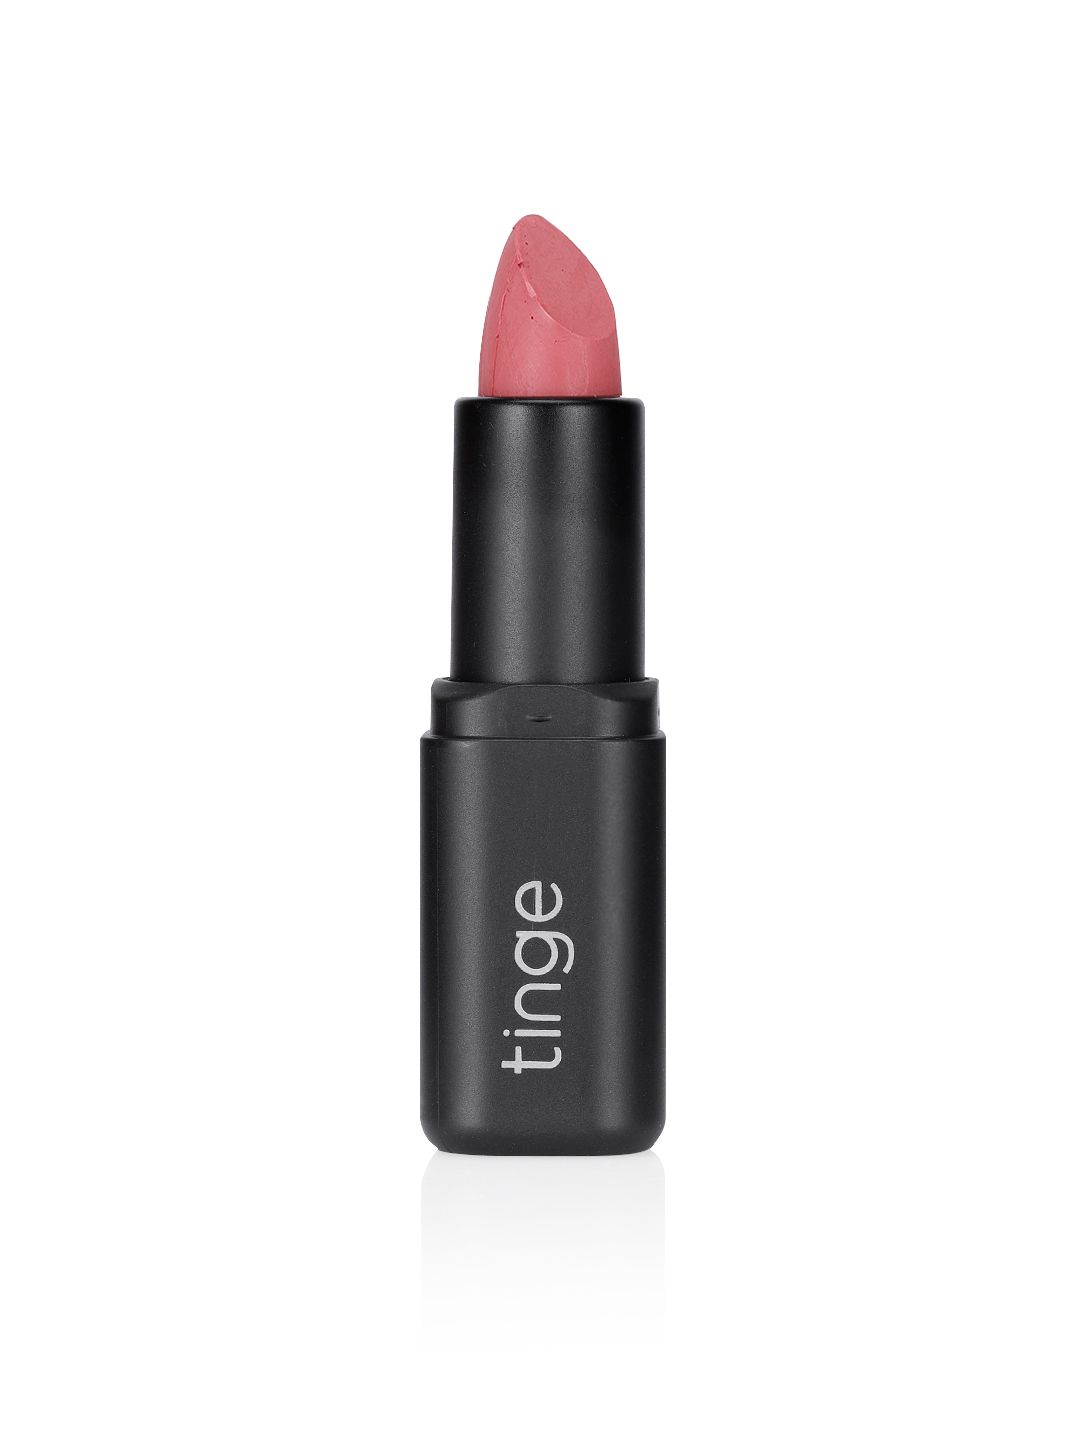 tinge Wax Lipstick Pillow Talk Kiss Me Coral 42M For Moisturizing Effect Price in India